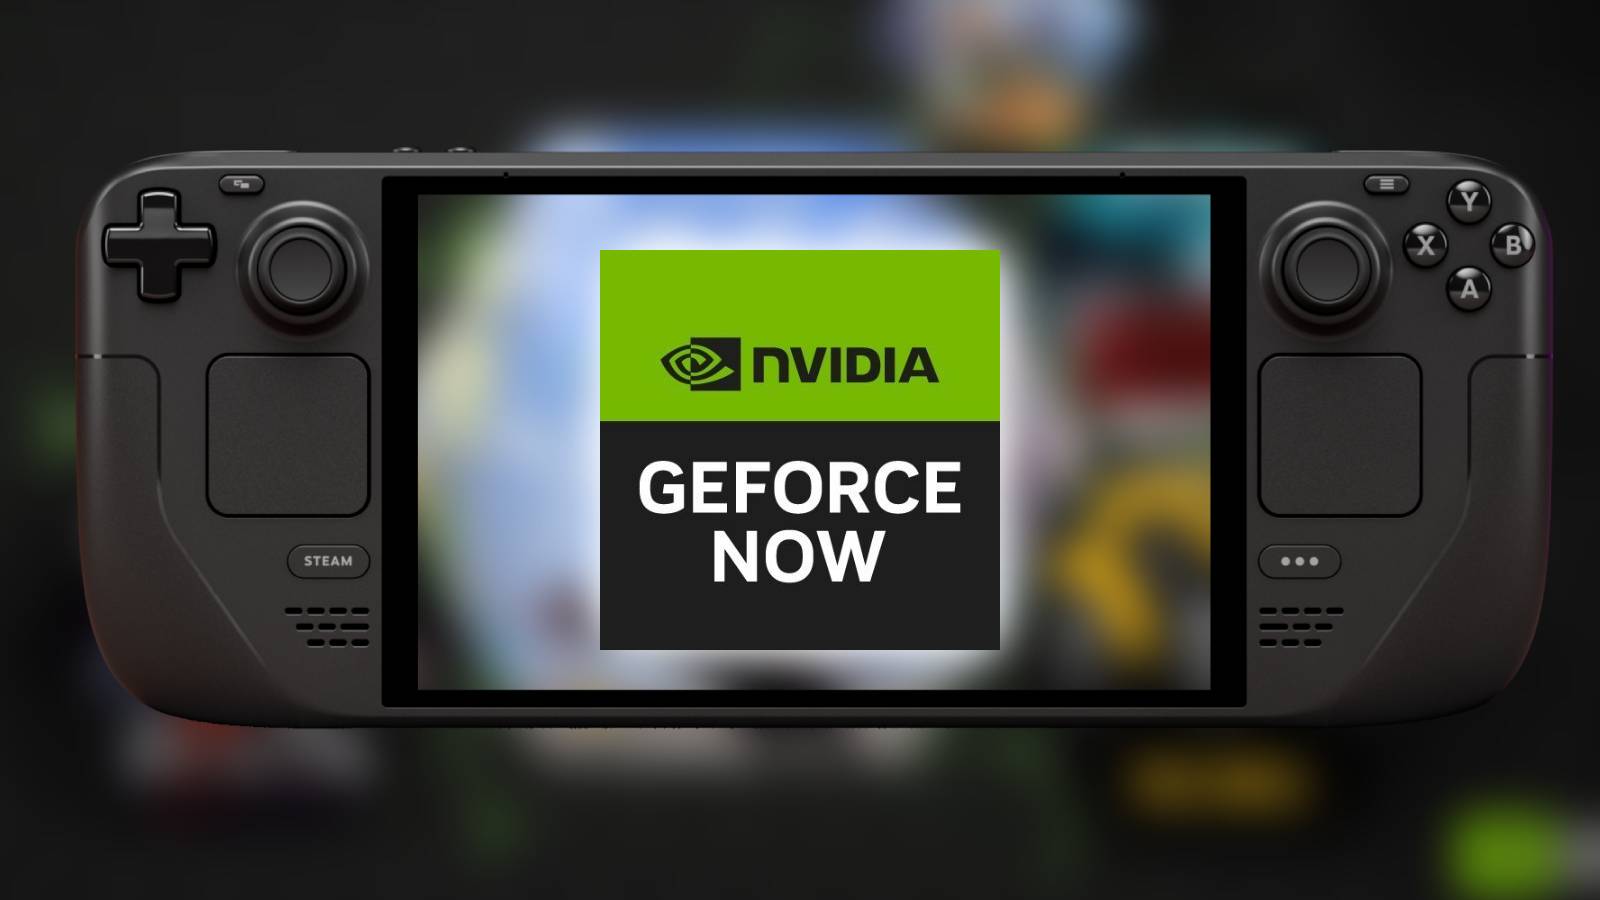 The Nvidia GeForce Now logo on the screen of a Steam Deck.